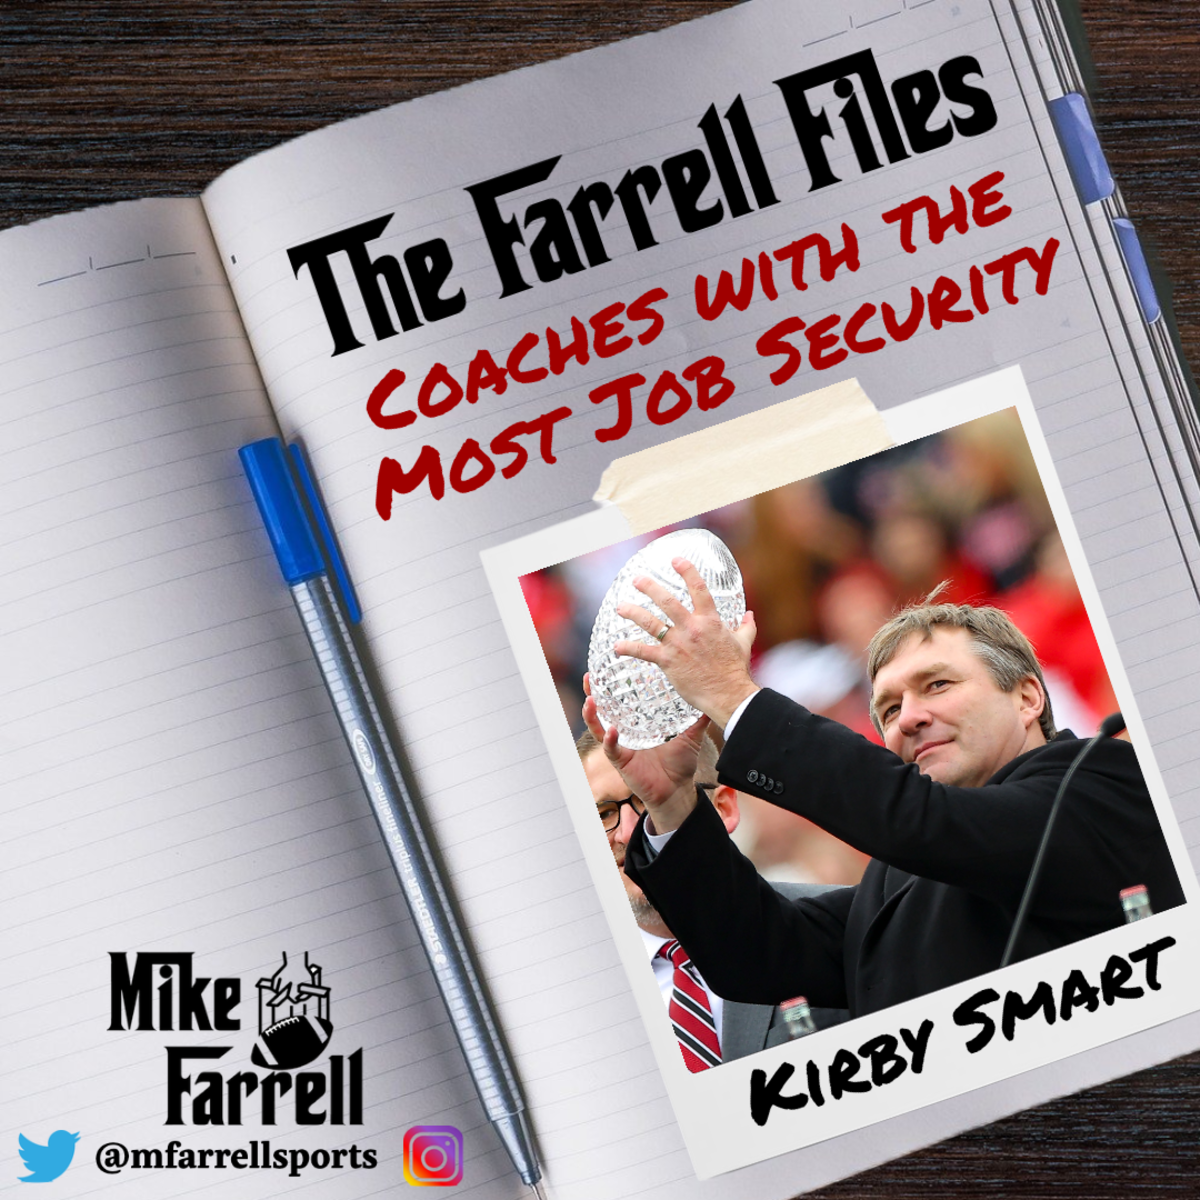 Farrell Files - Coaches with Job Security Kirby Smart